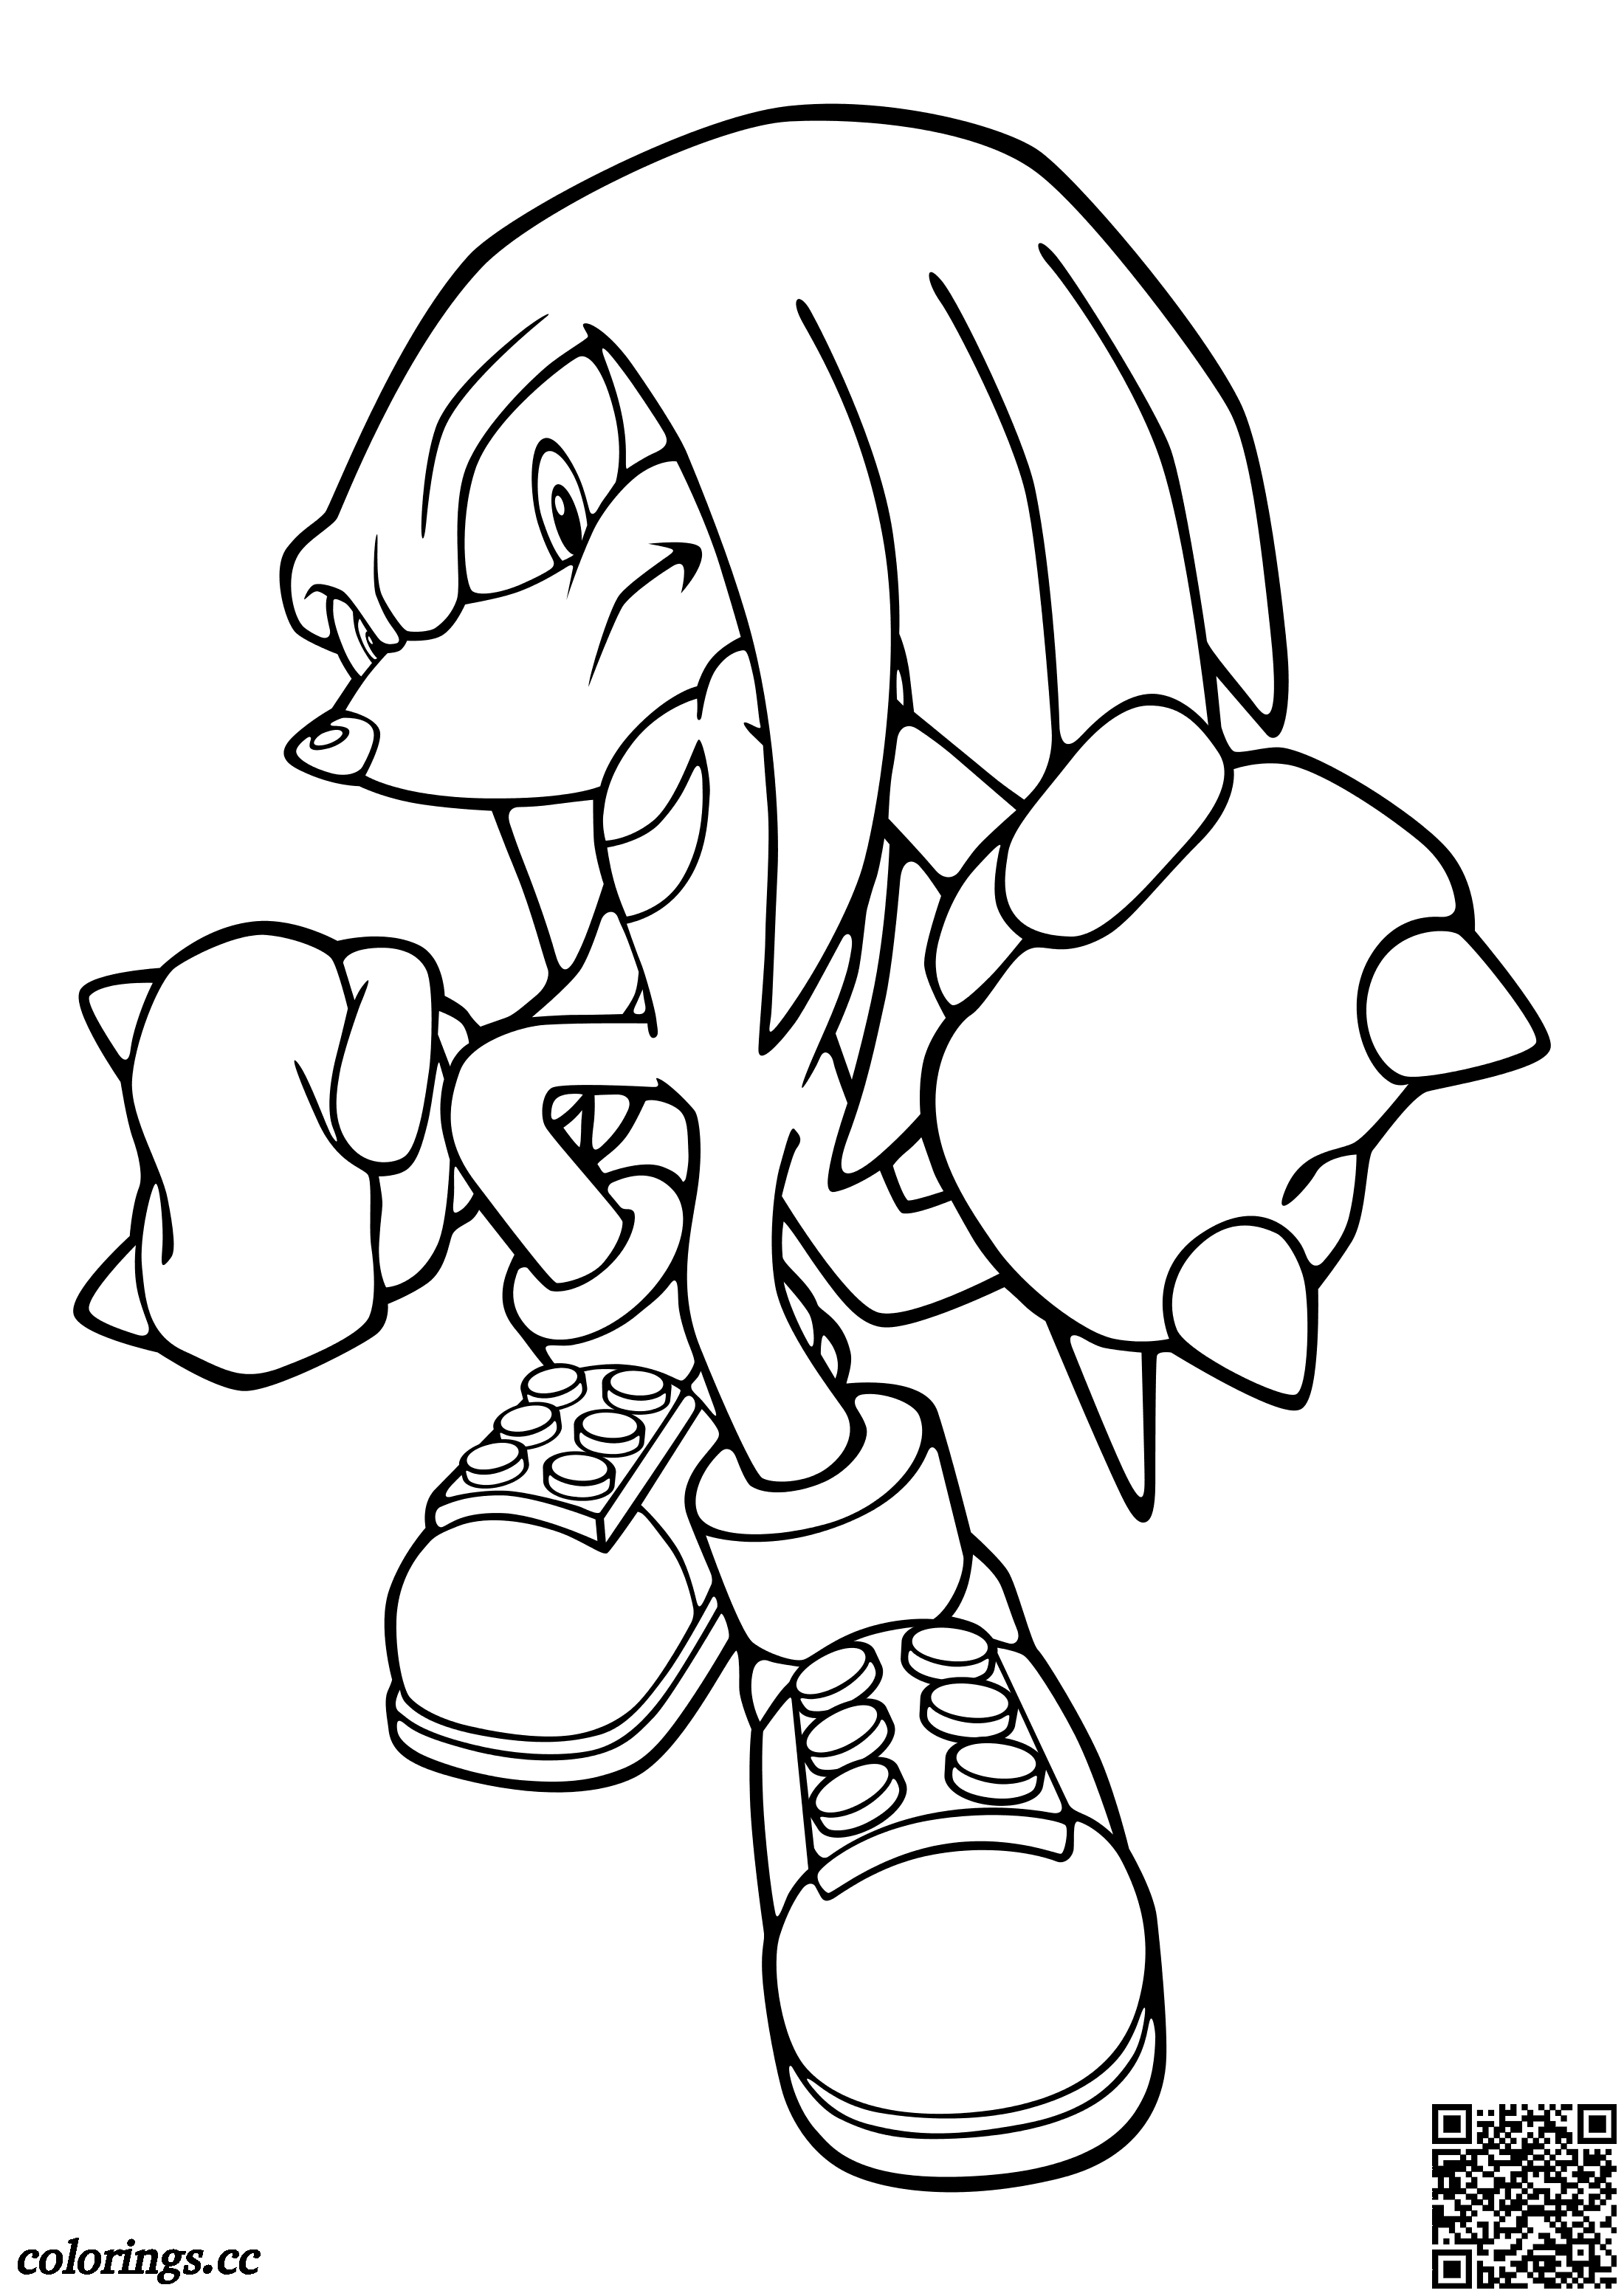 Knuckles the Echidna coloring pages, Sonic the Hedgehog coloring pages -  Colorings.cc